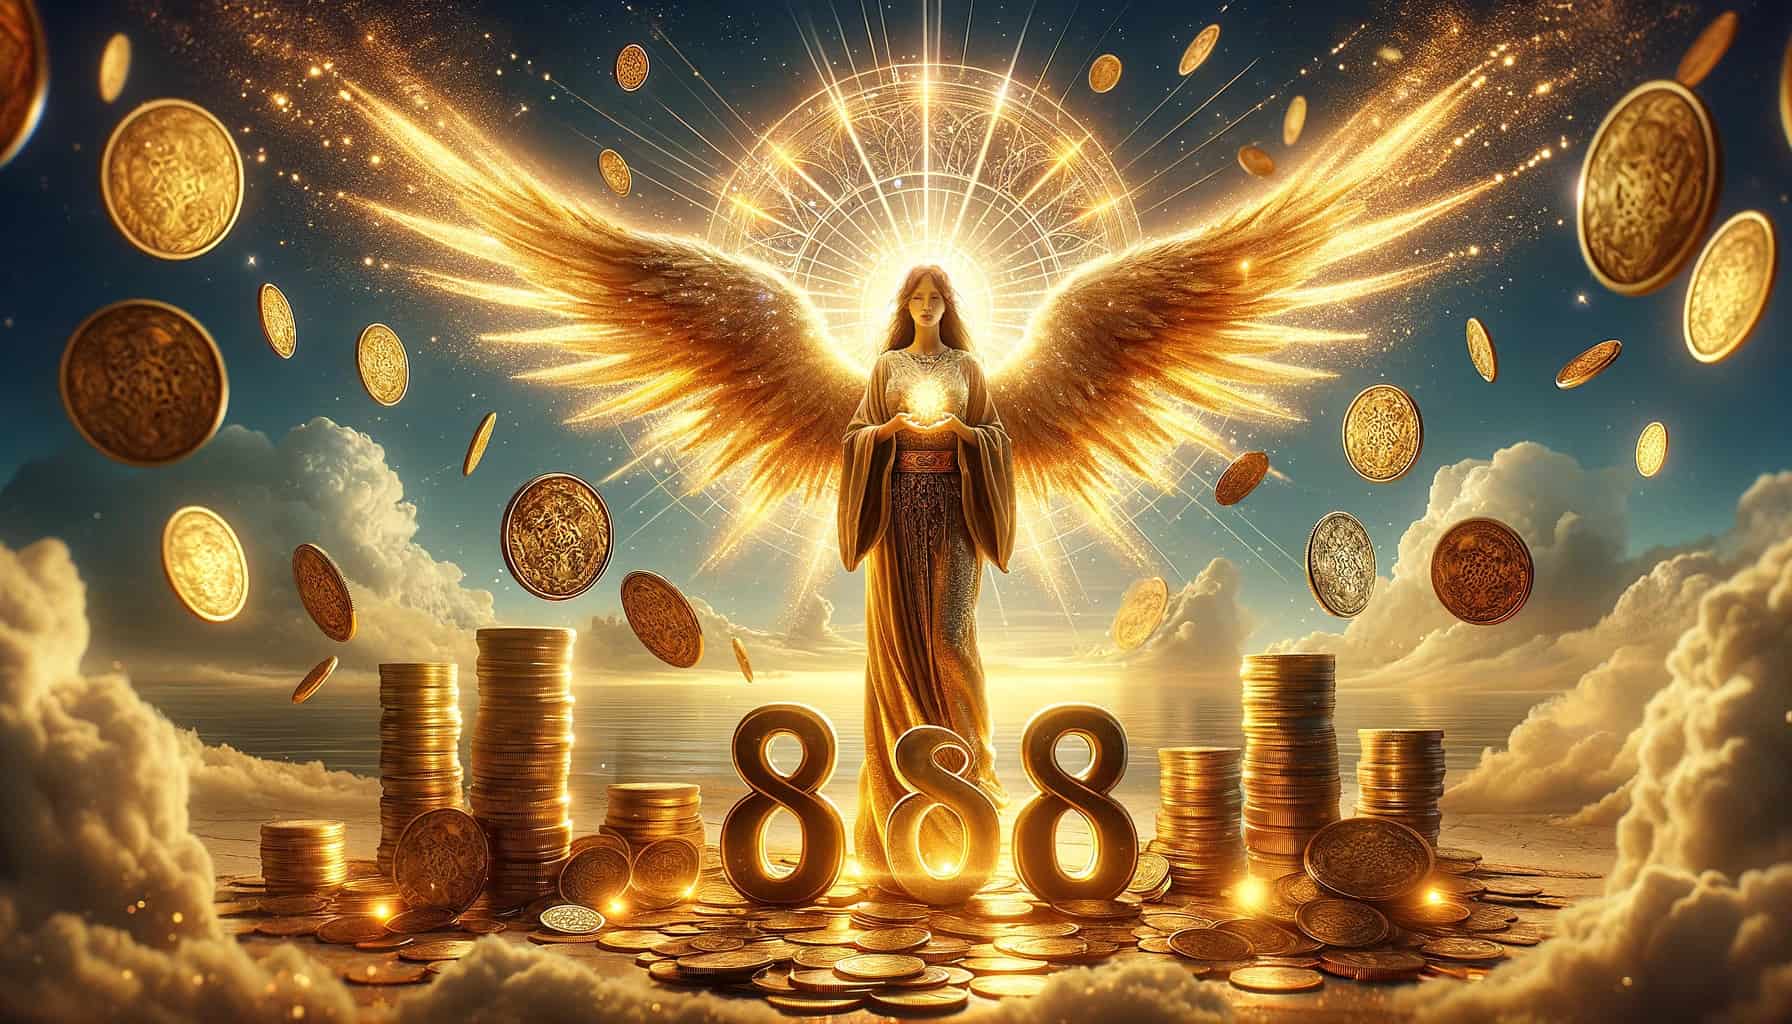 The Numerology Meaning of Keep Seeing Angel Number 888